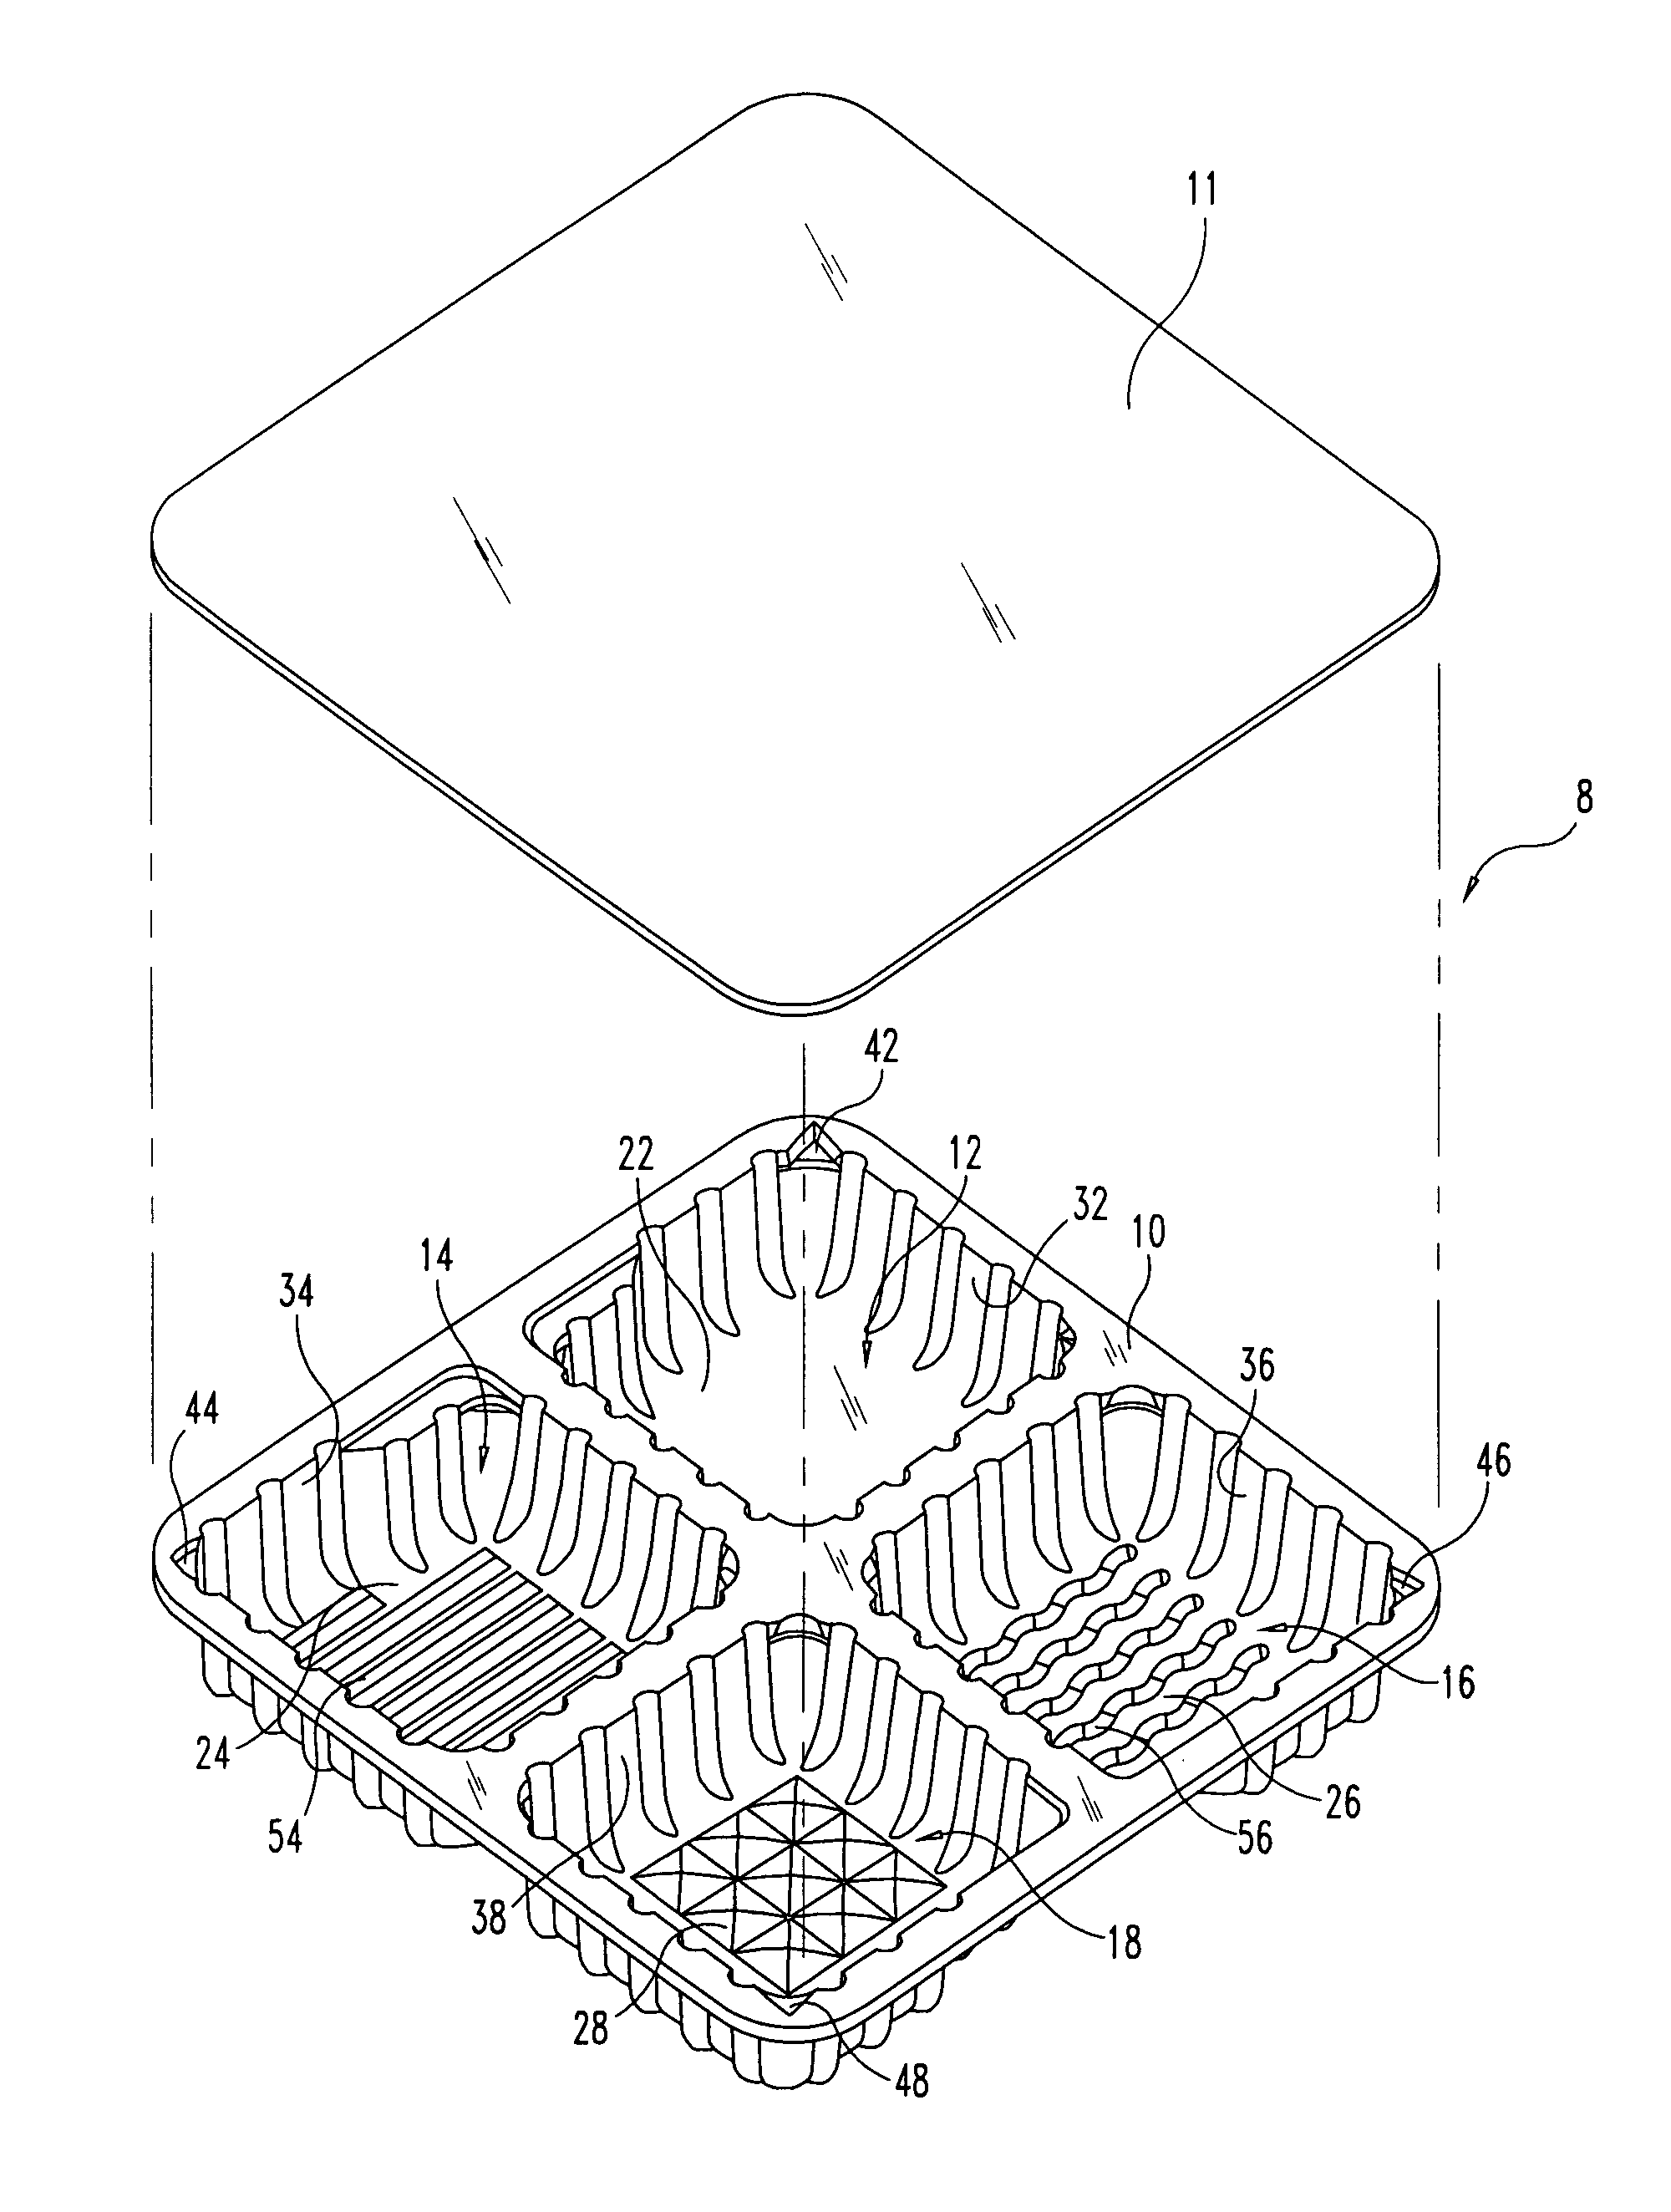 Microwave cooking tray with multiple floor patterns